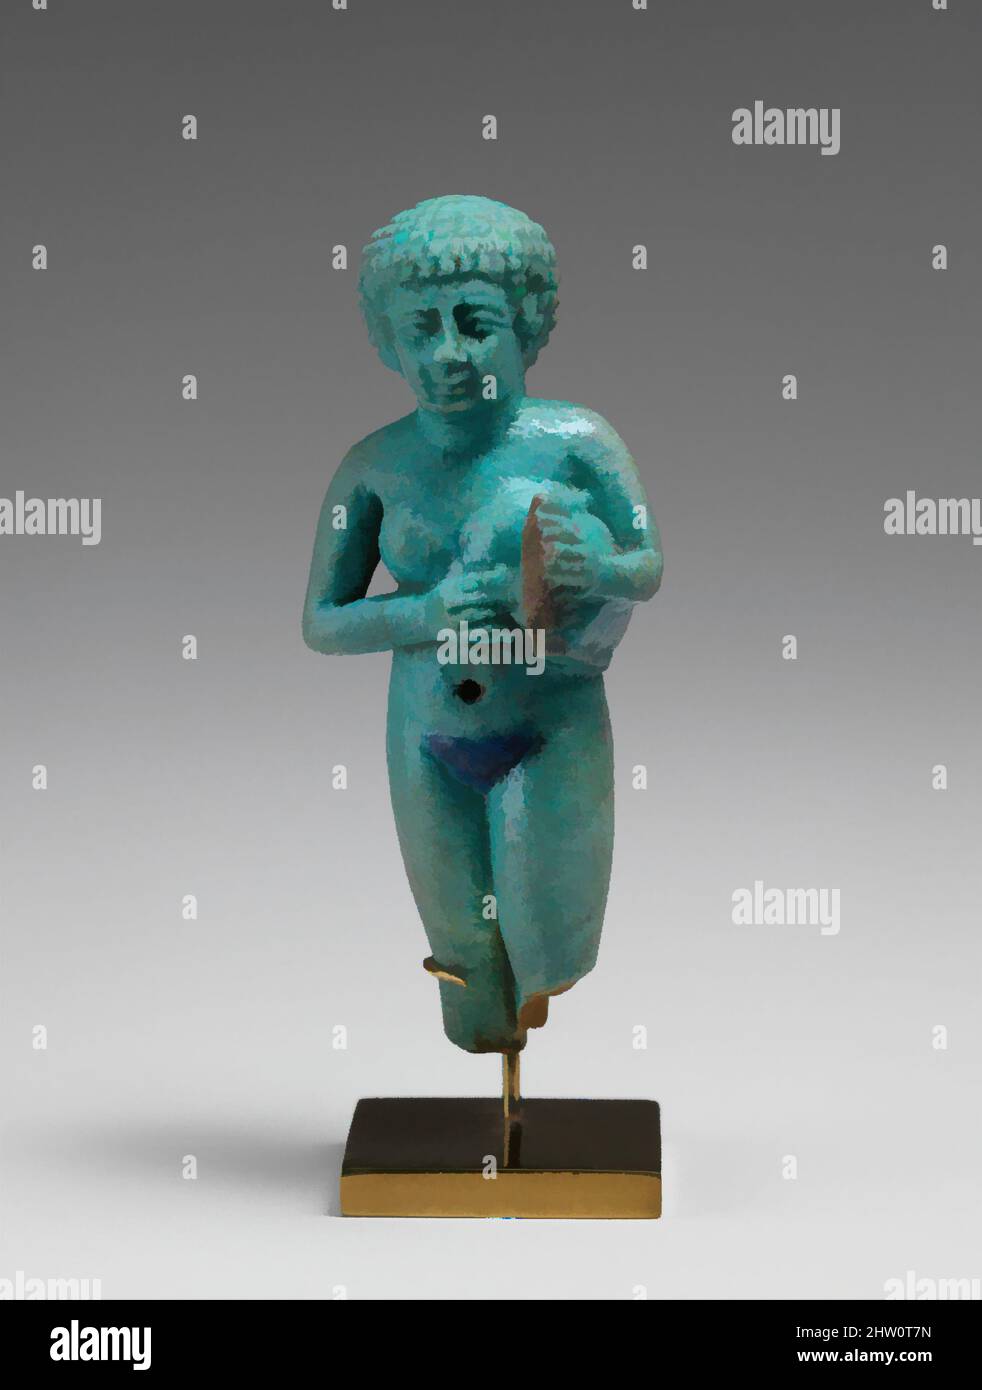 Art inspired by Amulet: Woman Playing Lyre, Late Period, Dynasty 26–30, 664–332 B.C., From Egypt, Light blue faience, H. 5.4 cm (2 1/8 in.); W. 2.1 cm (13/16 in.); D. 1.7 cm (11/16in.), This figure is a late example of a repertoire of figures mostly created in a distinctive spotted, Classic works modernized by Artotop with a splash of modernity. Shapes, color and value, eye-catching visual impact on art. Emotions through freedom of artworks in a contemporary way. A timeless message pursuing a wildly creative new direction. Artists turning to the digital medium and creating the Artotop NFT Stock Photo